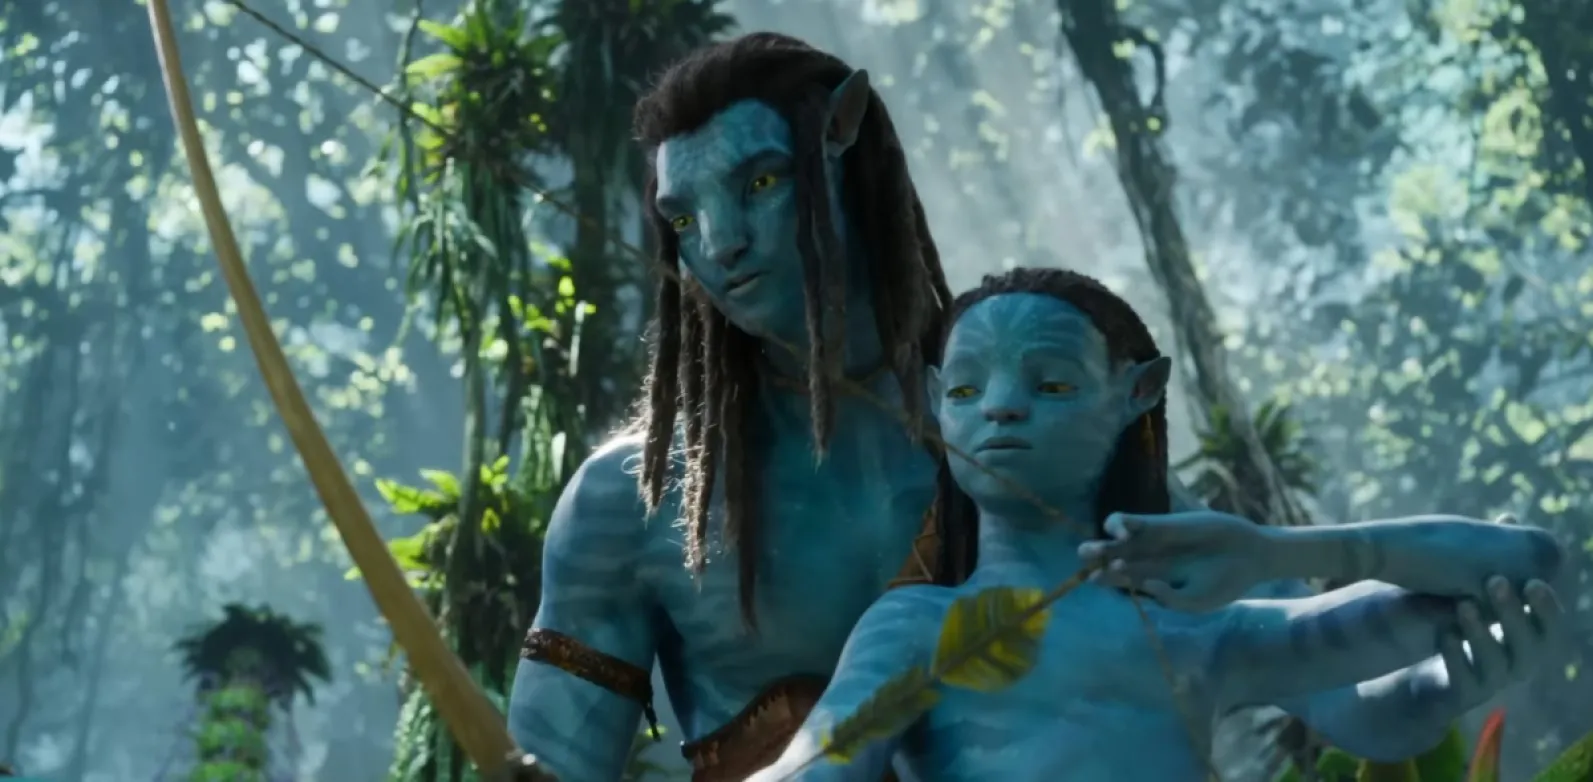 Person and their son. Avatar: Way of the Water screencap. Image: Disney/20th Century Fox.